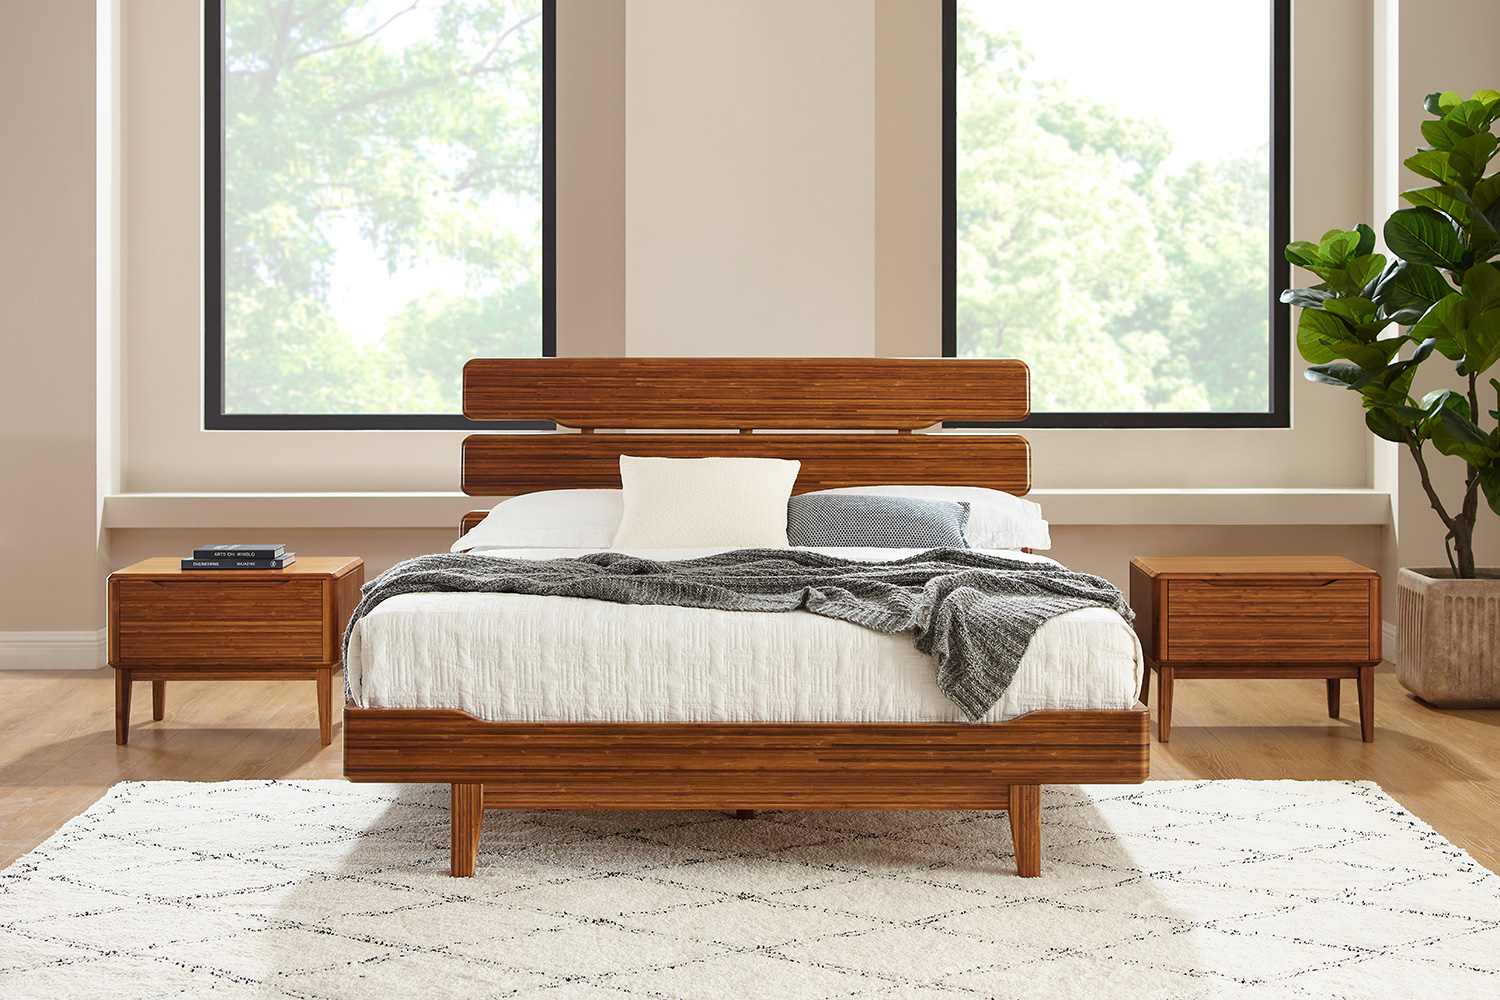 Greenington™ Currant Platform Bed - Amber, Eastern King Size - stylish bed will give your bedroom new fresh colors and pleasant sleep